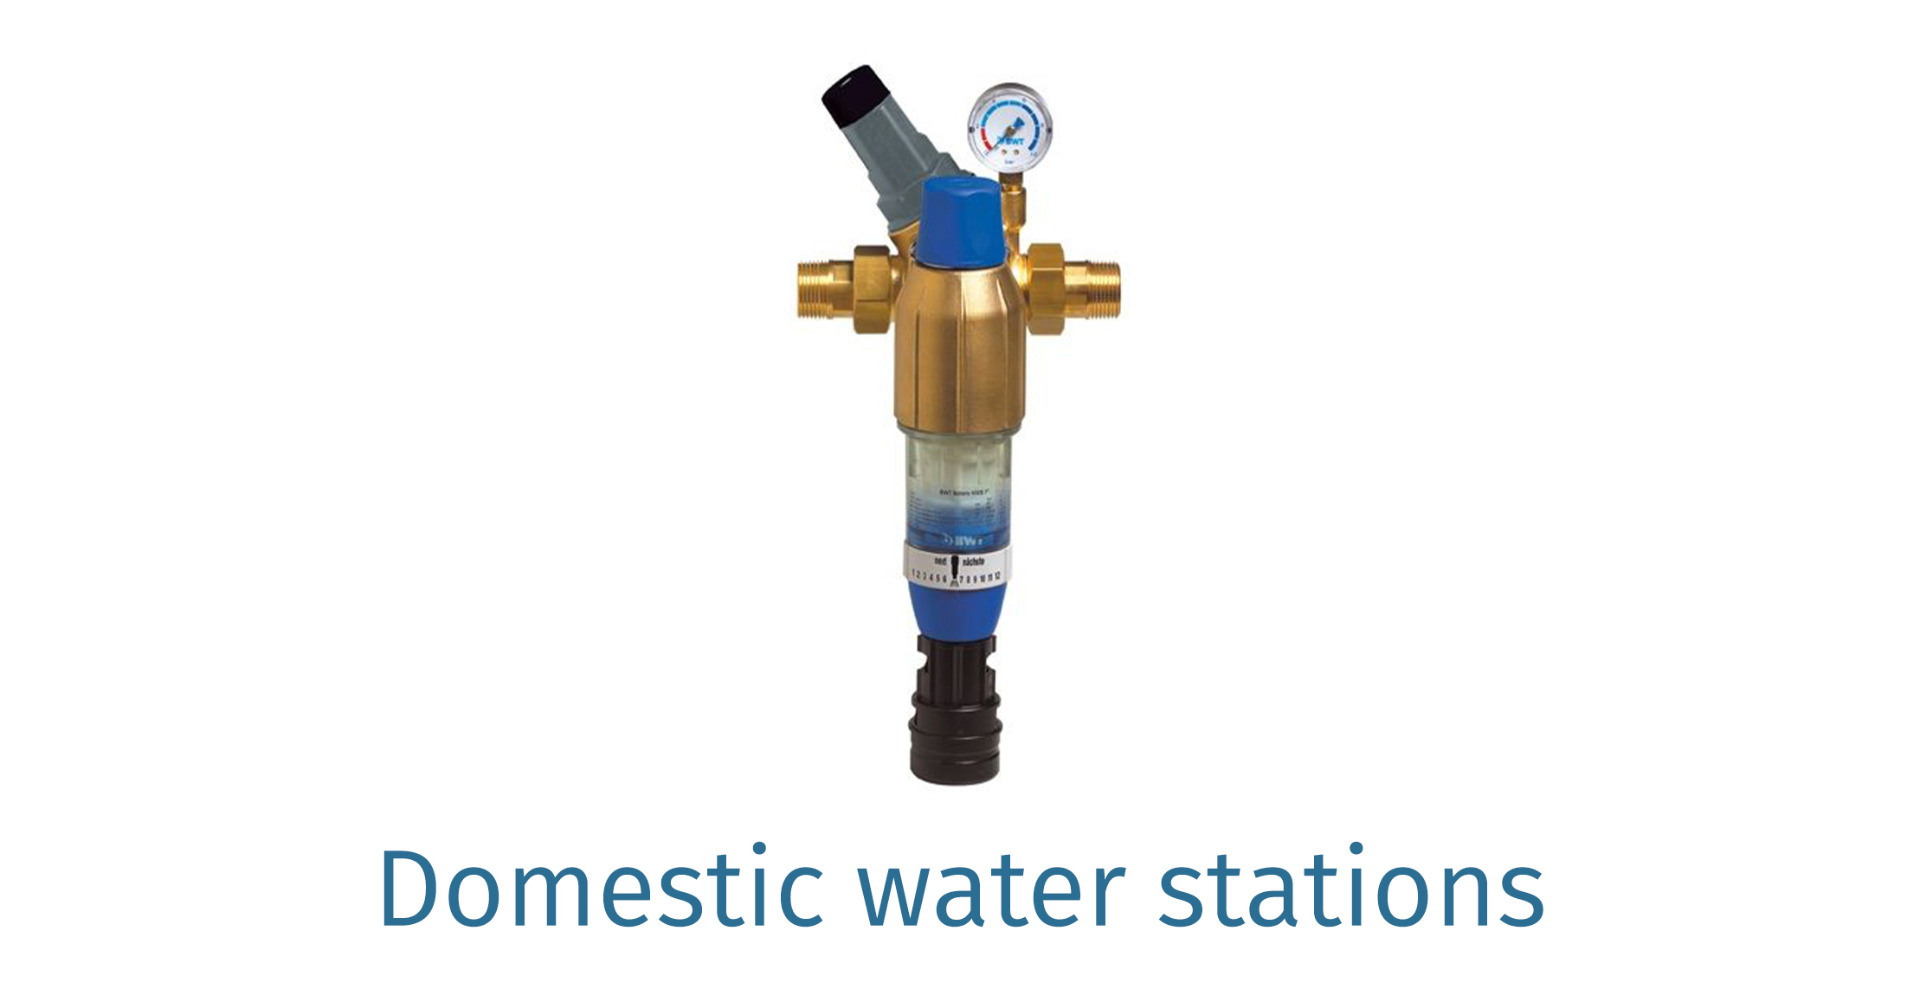 Domestic water stations